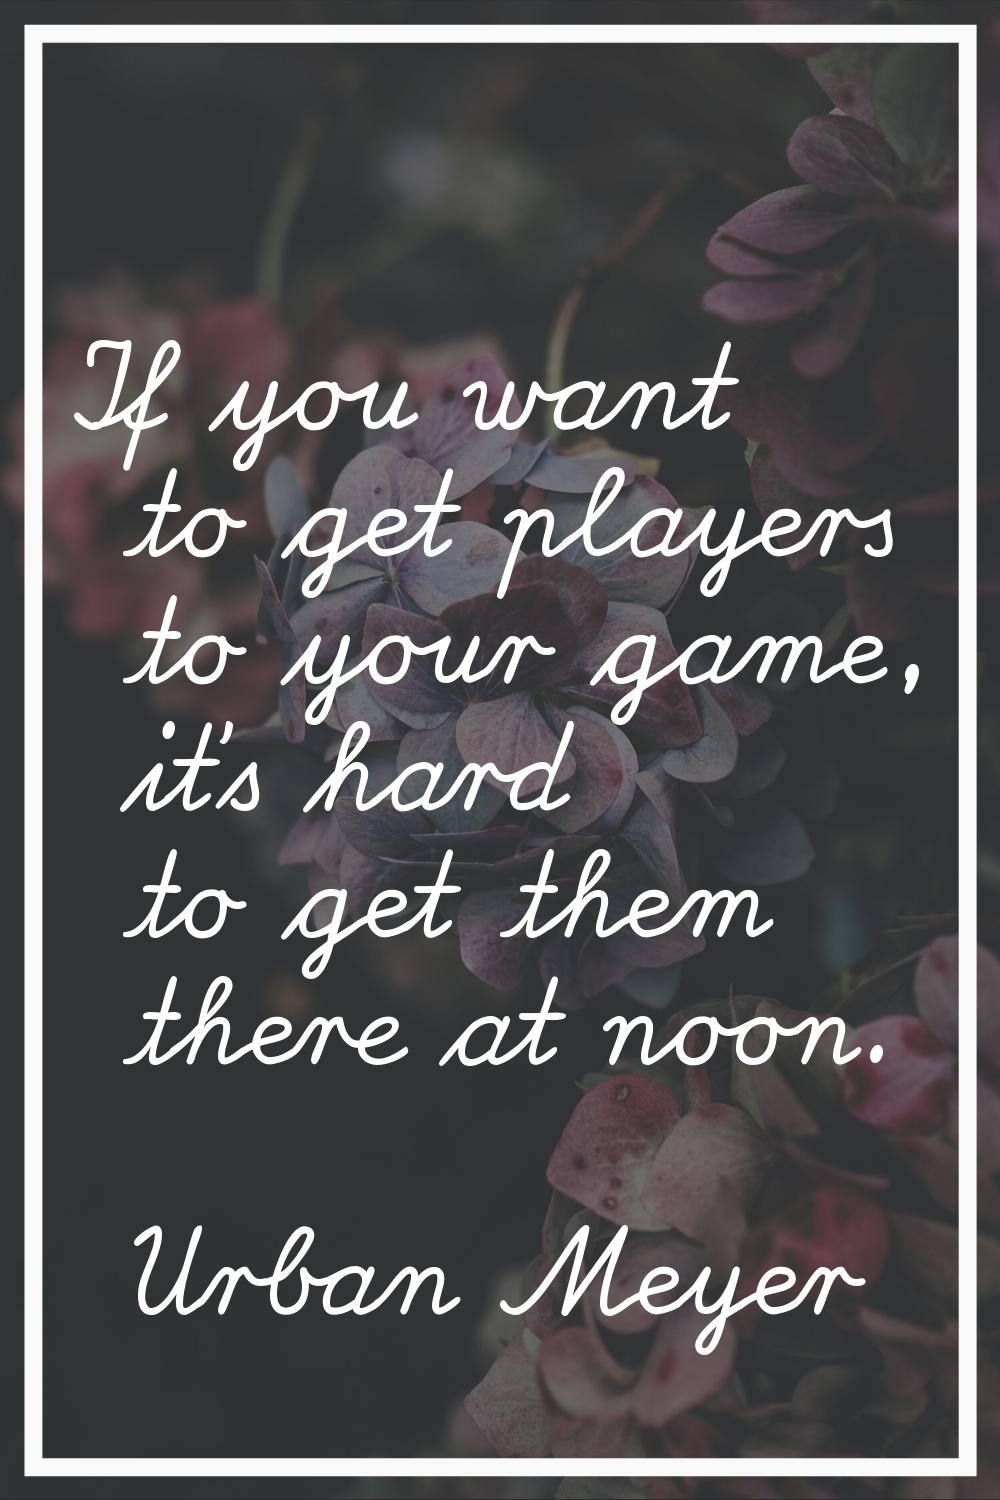 If you want to get players to your game, it's hard to get them there at noon.